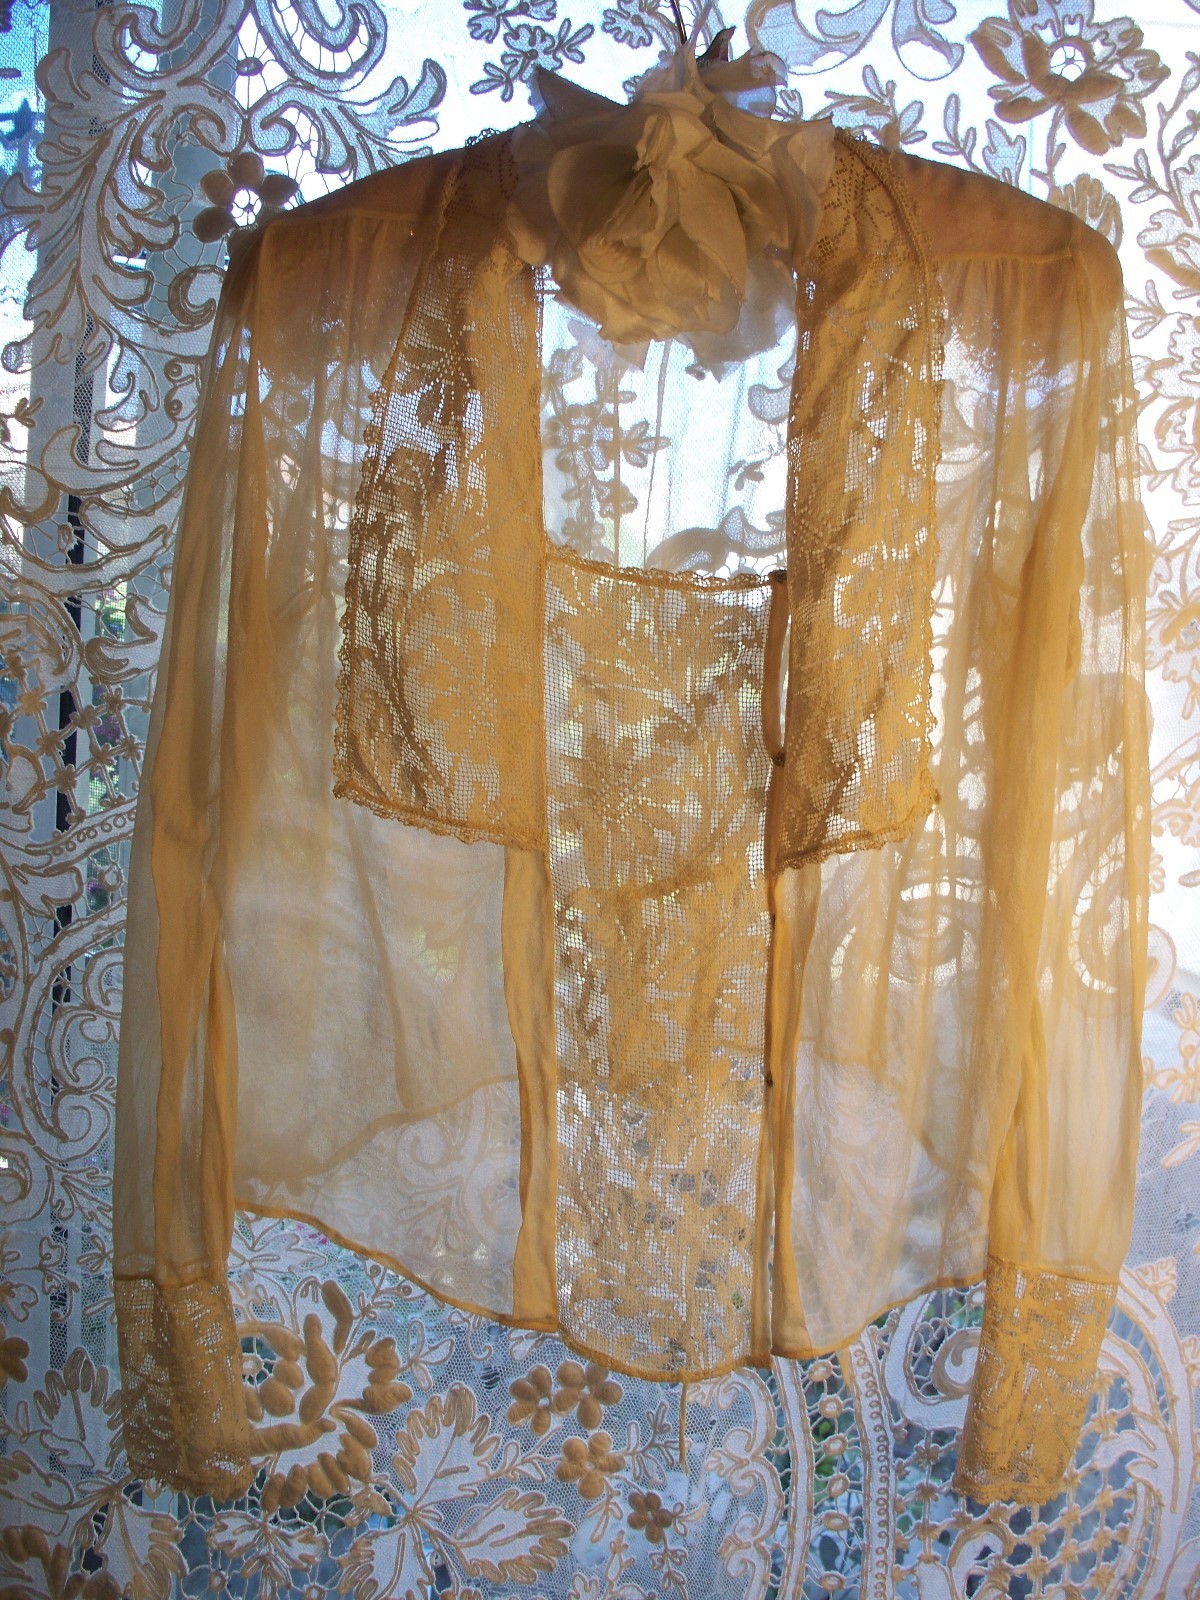 Vintage Ethereal Ecru Crepe with Lace Blouse, circa 1930's